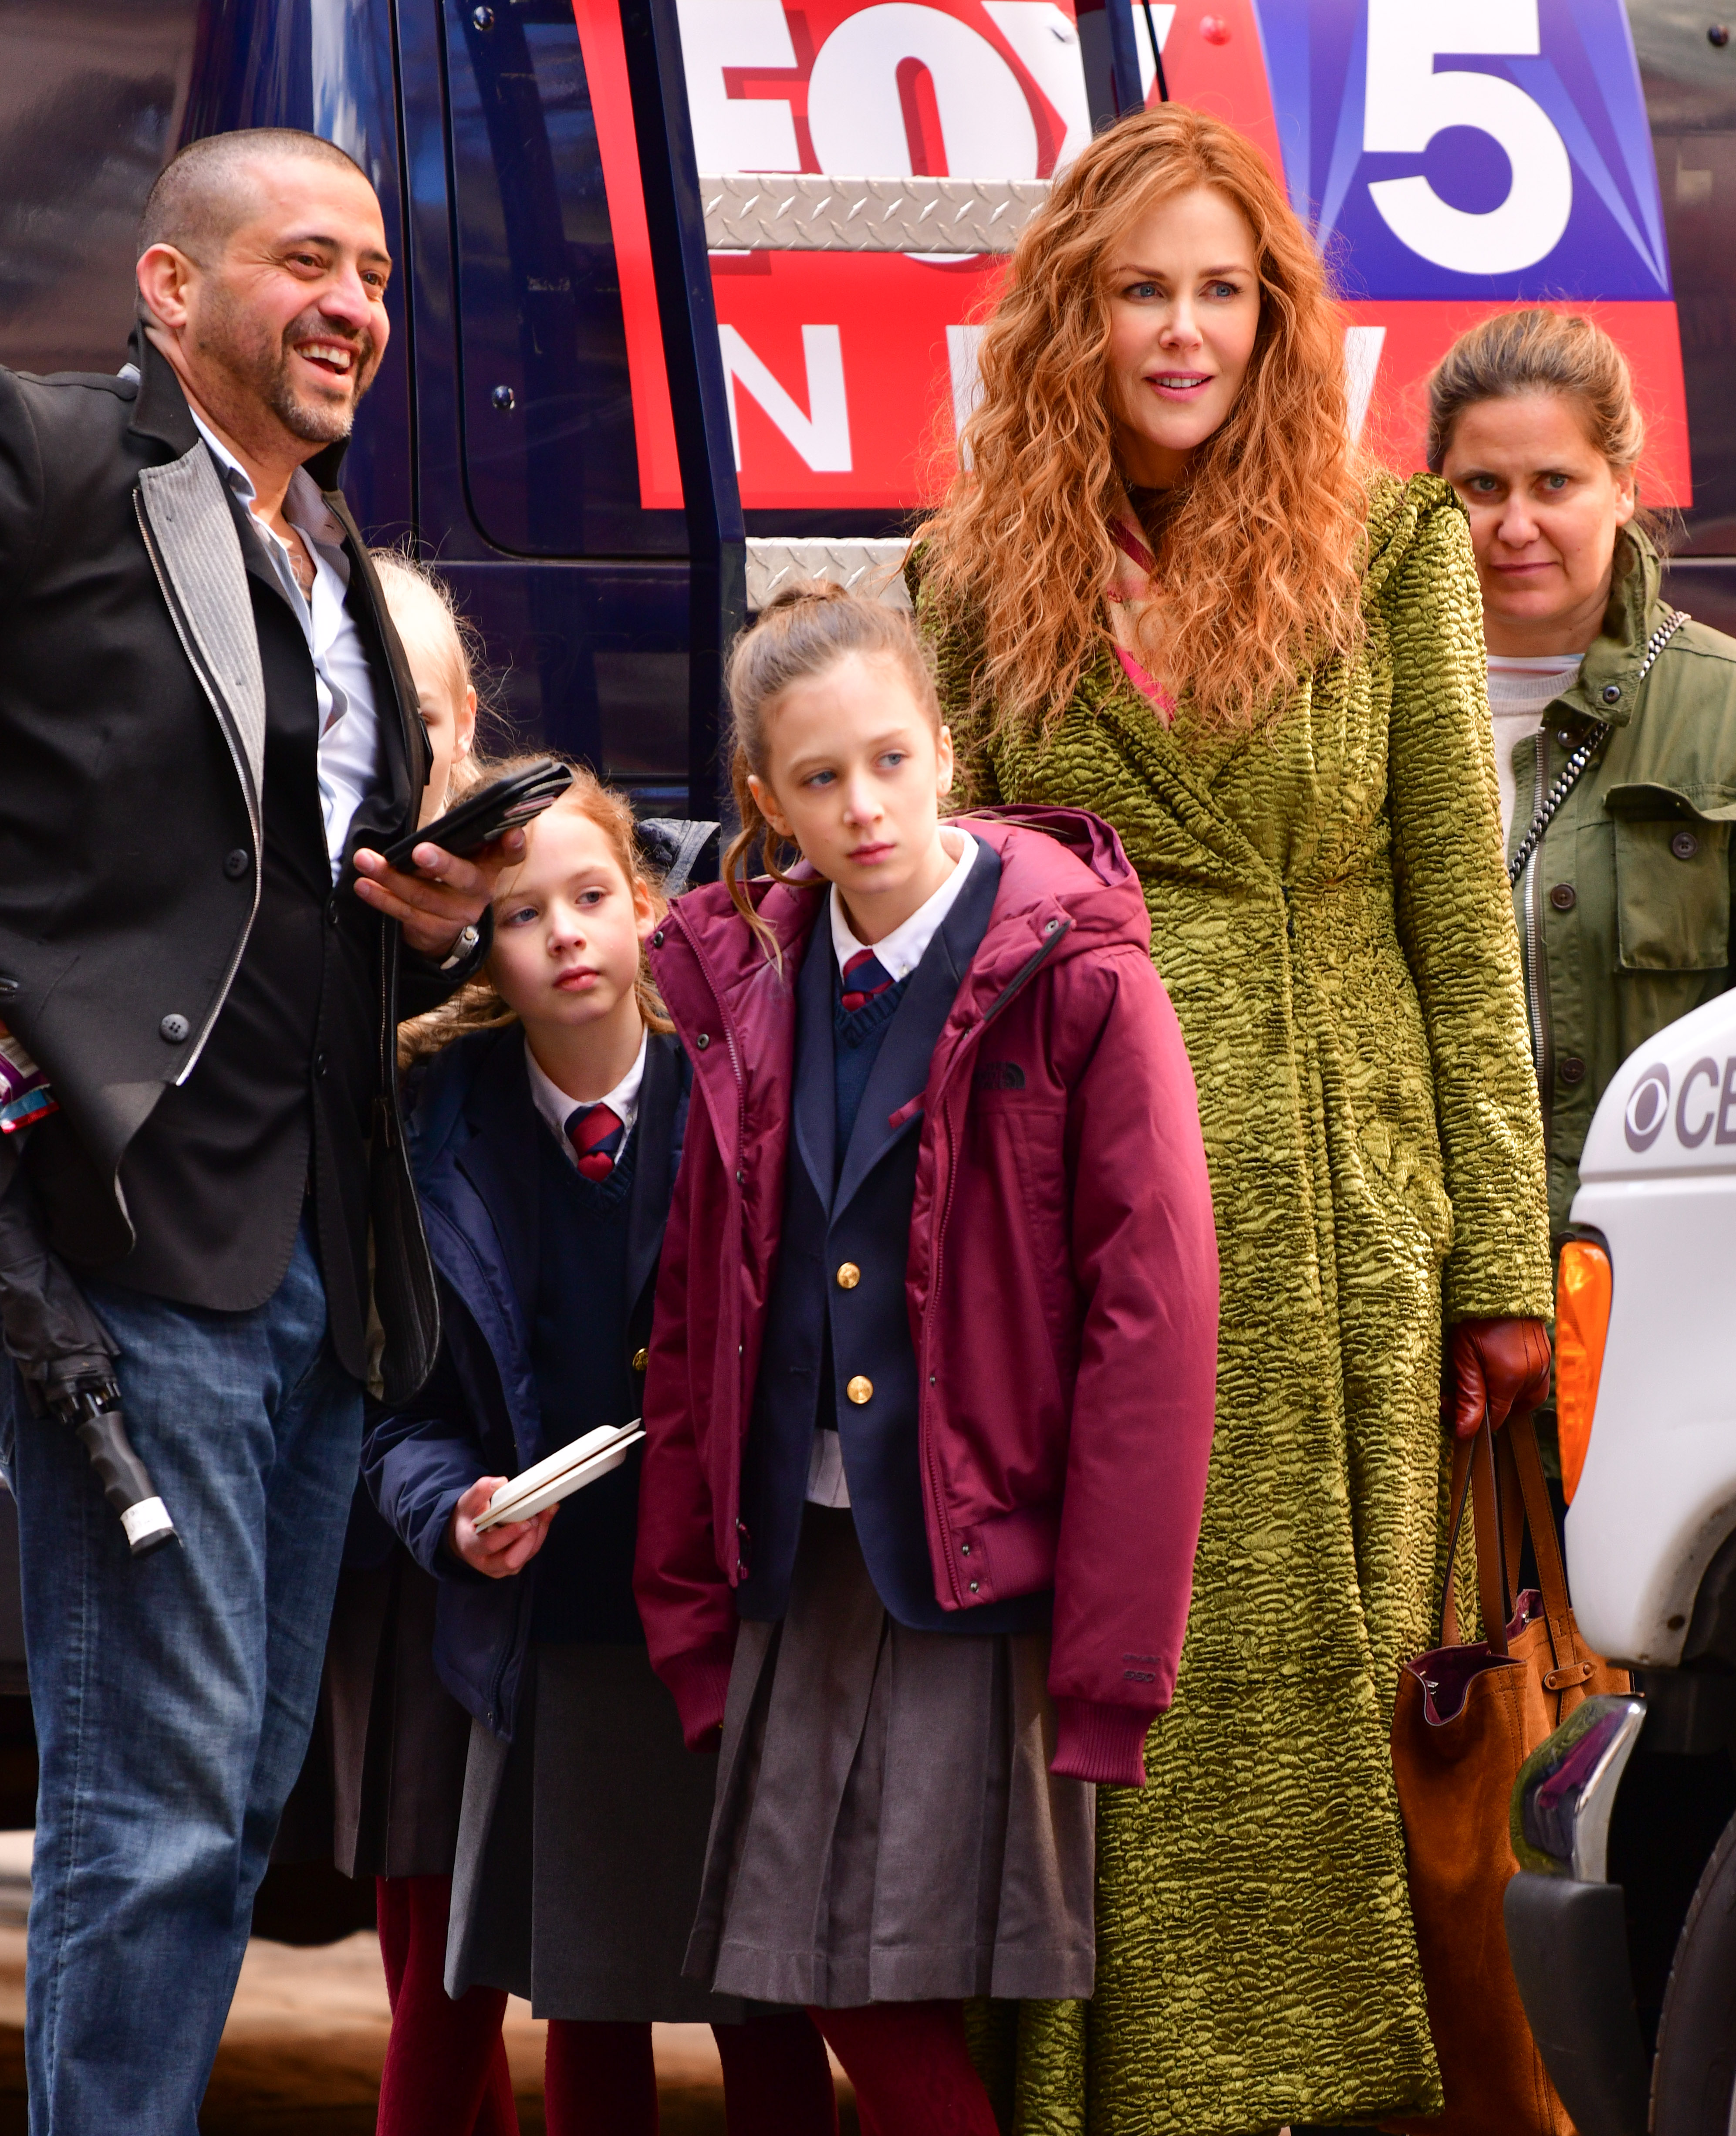 Faith Margaret and Sunday Rose Kidman Urban, with Nicole Kidman, seen filming "The Undoing" on location in New York City's Upper East Side on March 19, 2019. | Source: Getty Images